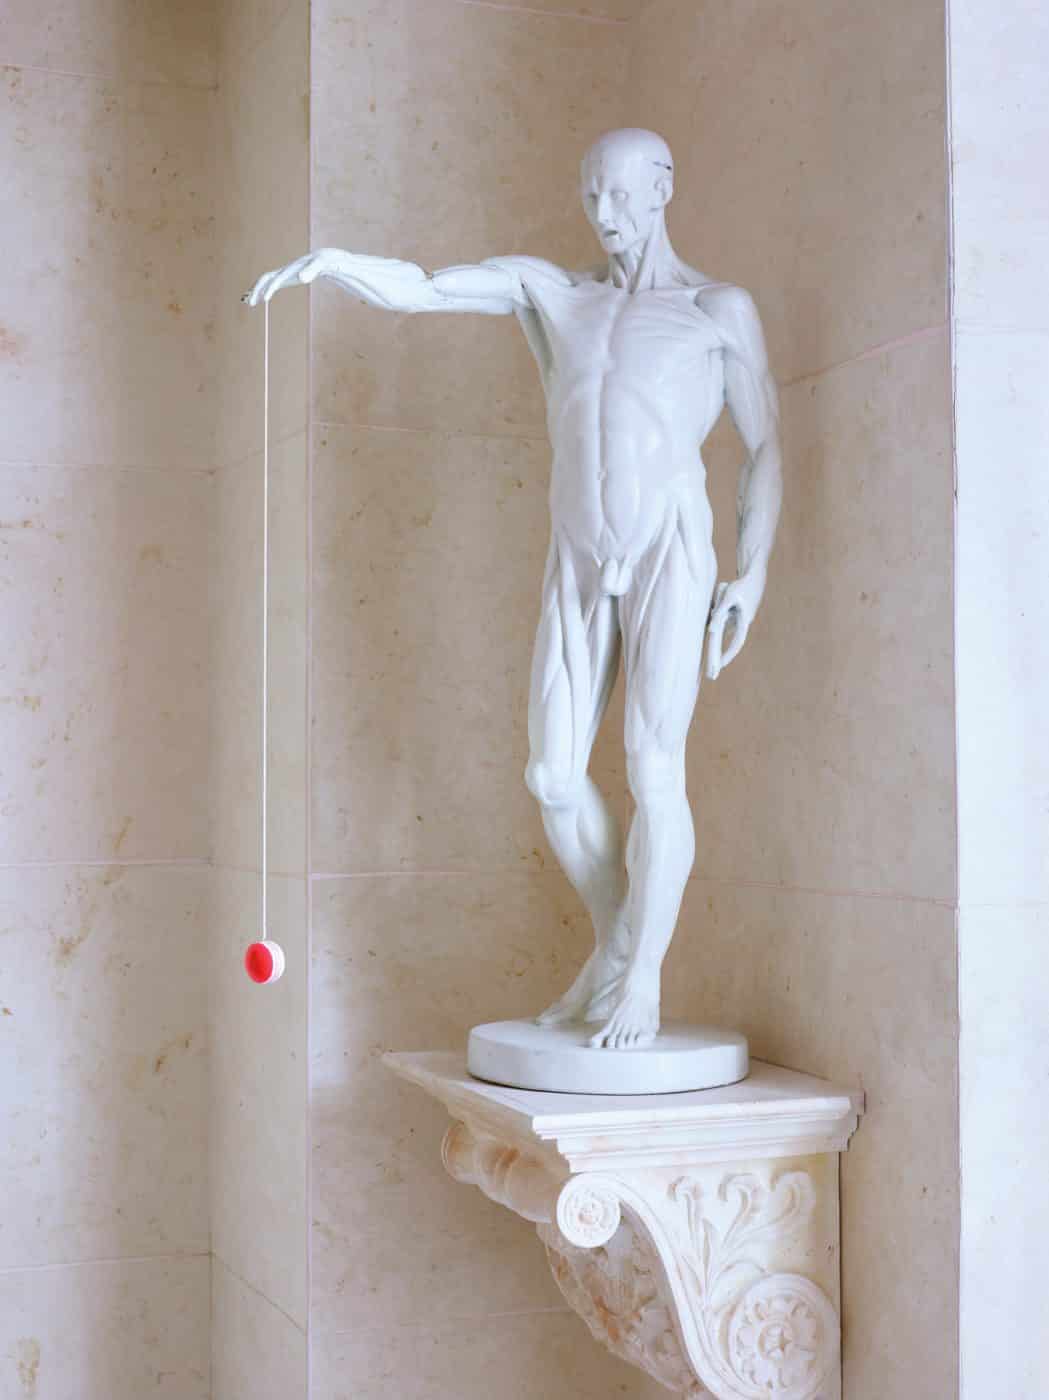 A yo-yo hanging from the hand of a reproduction Jean-Antoine Houdon sculpture in Prisant's home